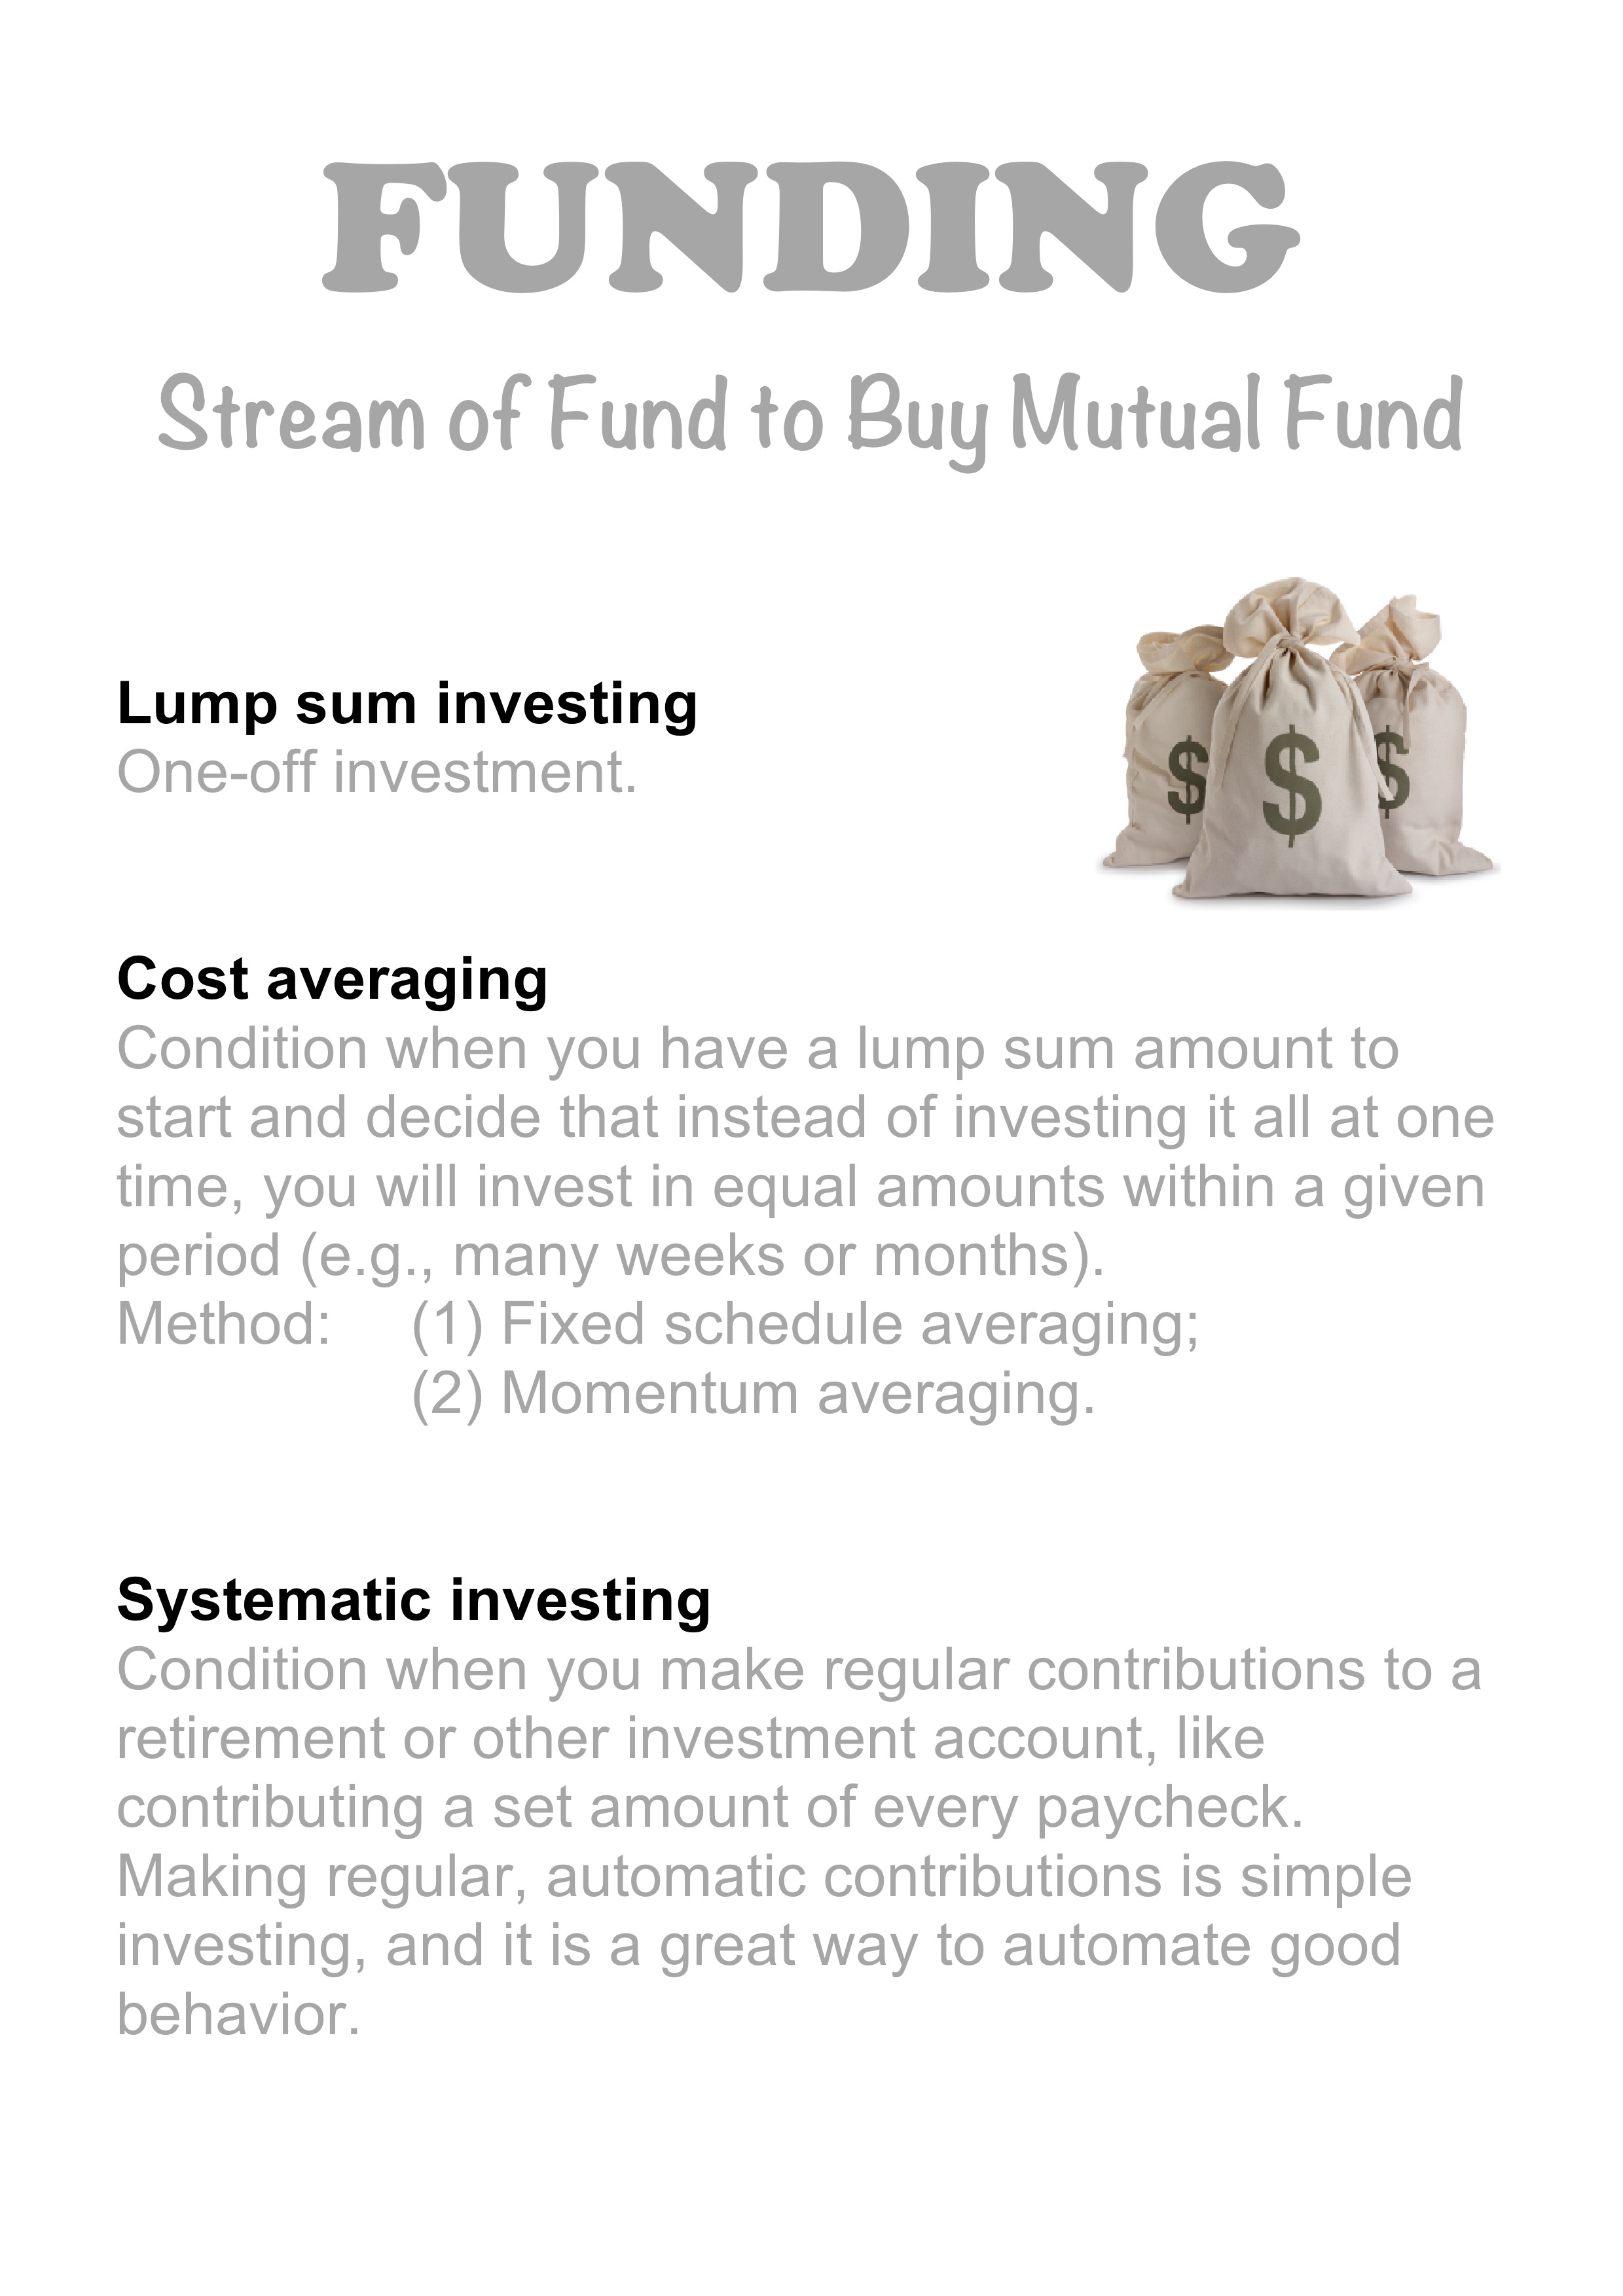 Funding: Stream of Fund to Buy Mutual Fund